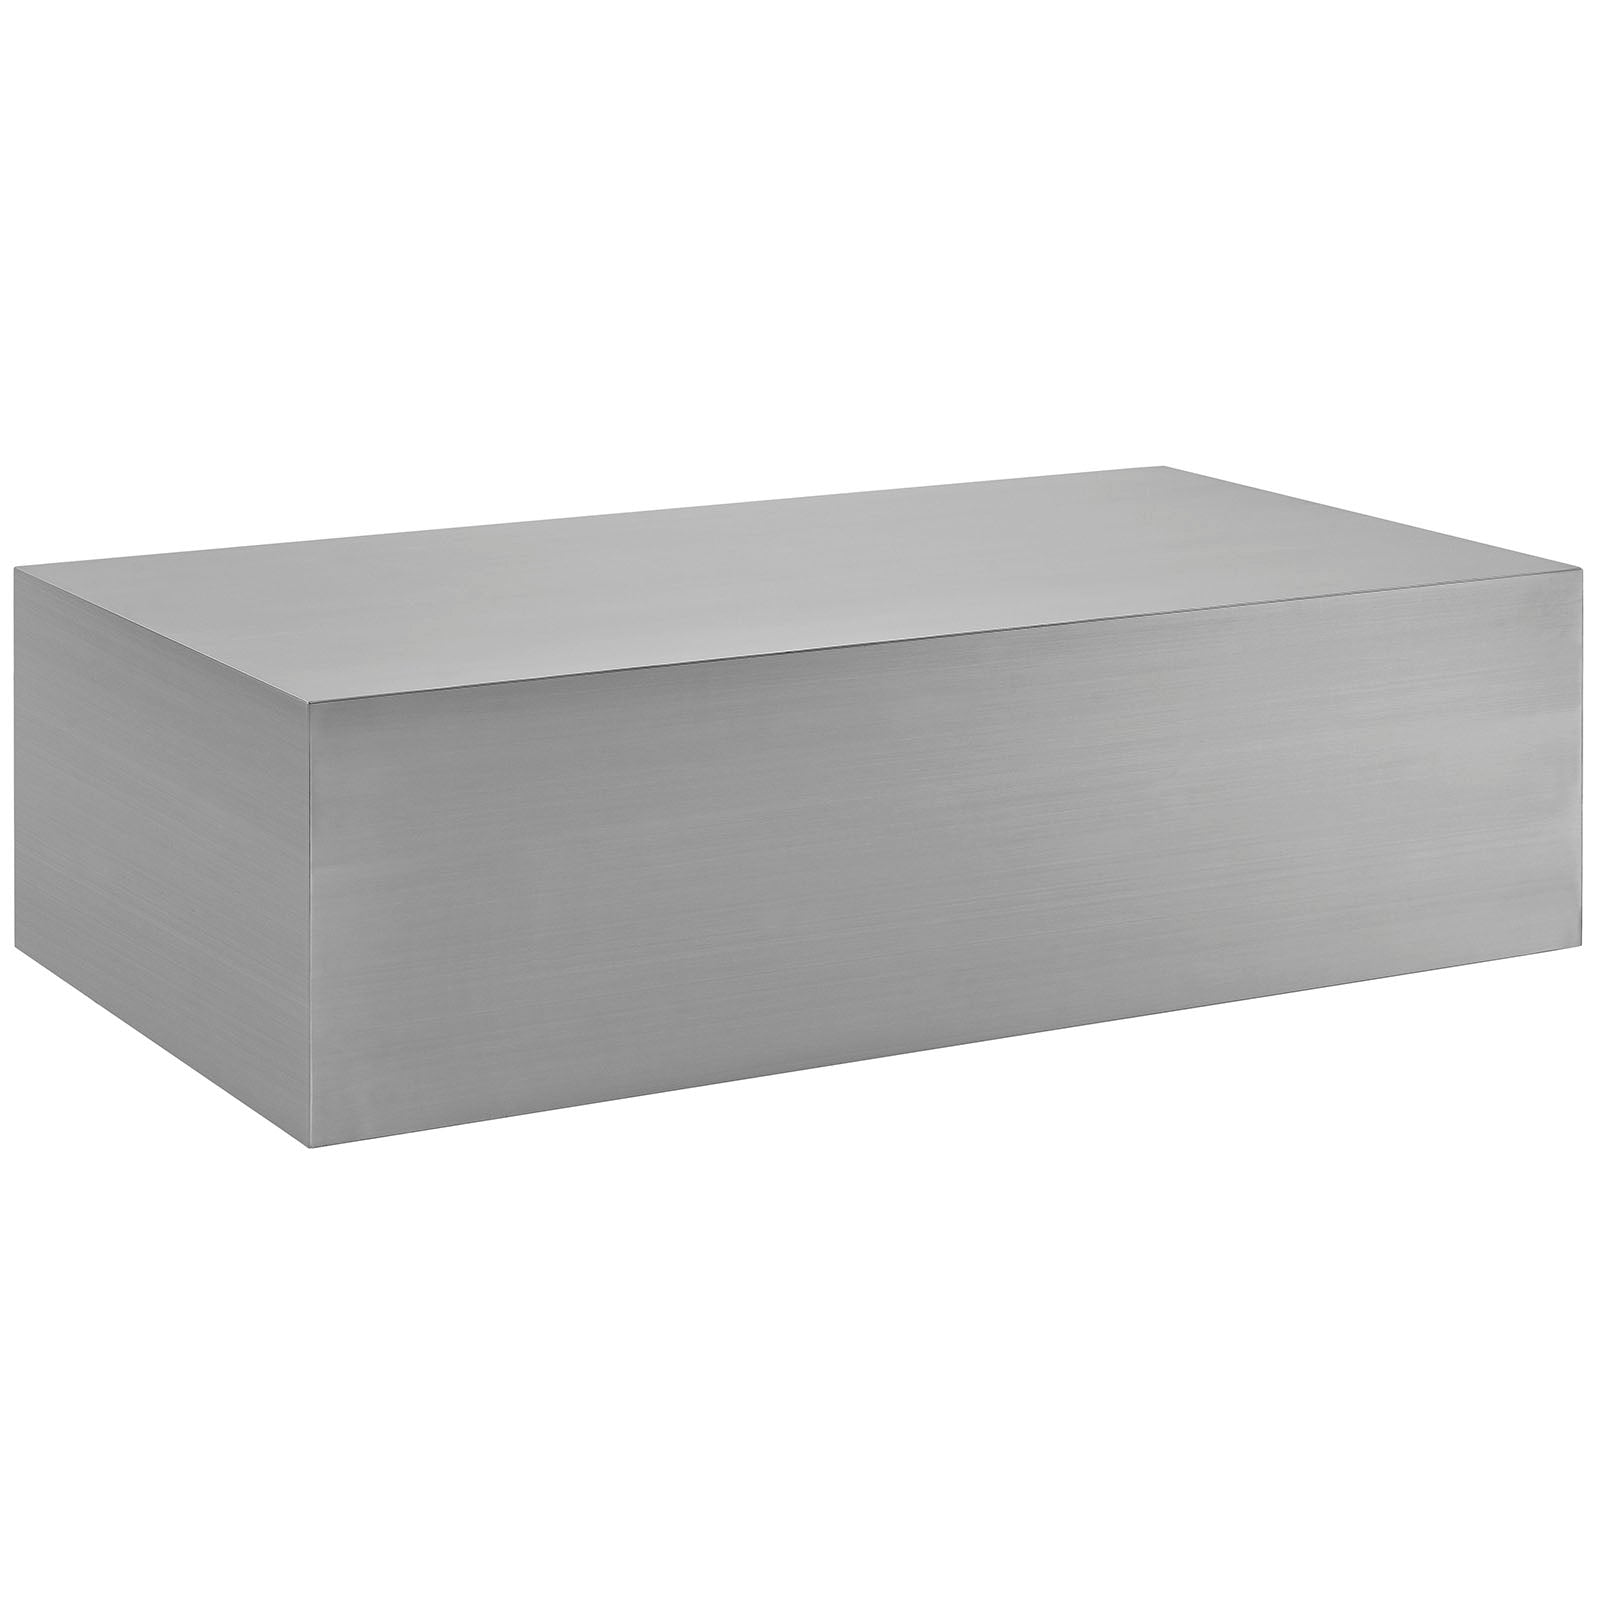 Cast Stainless Steel Coffee Table - East Shore Modern Home Furnishings